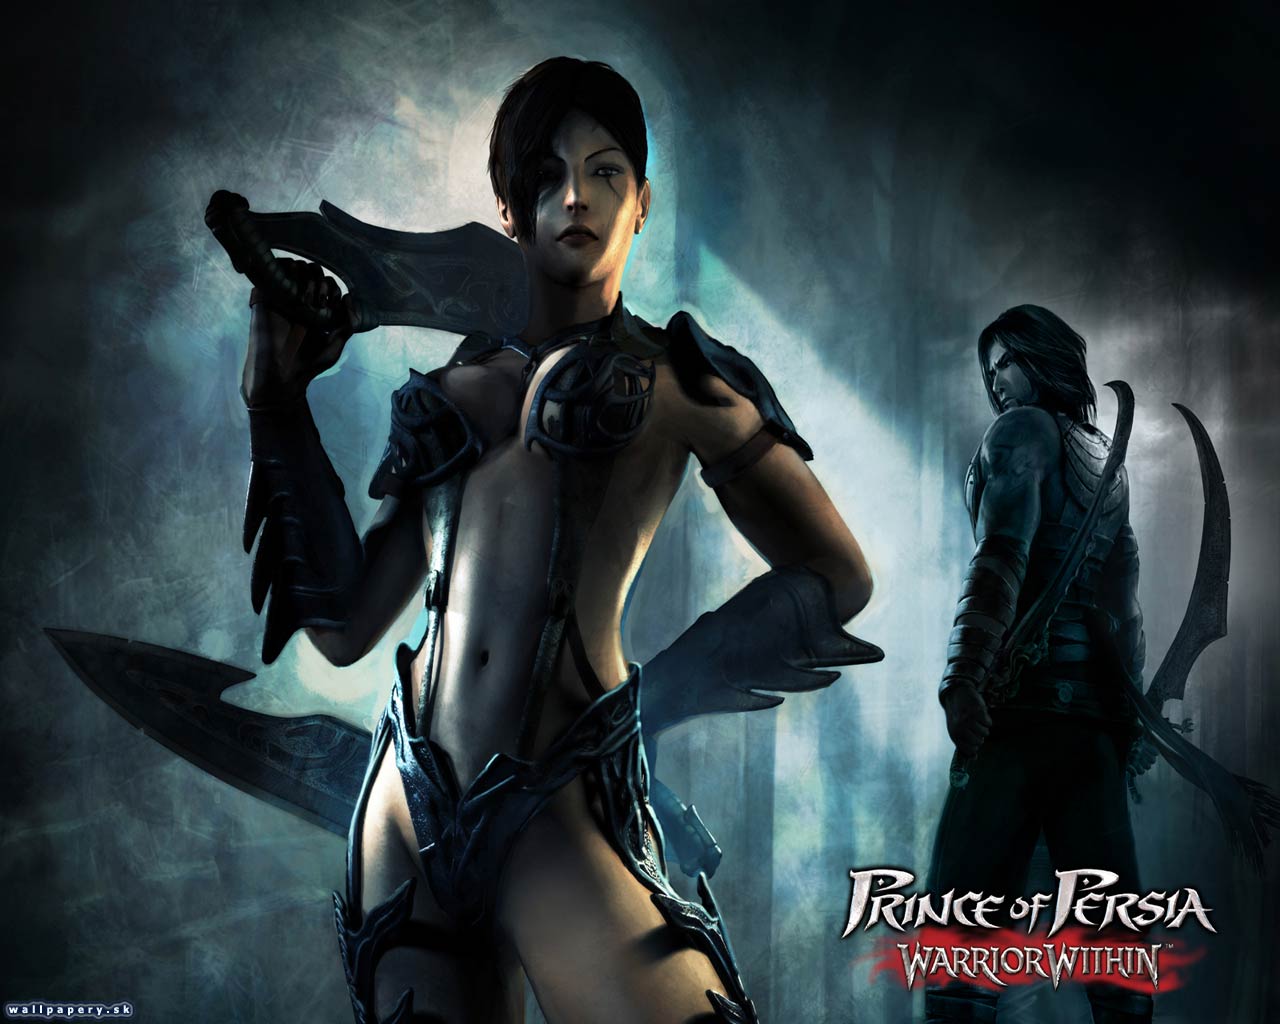 Prince of Persia: Warrior Within - wallpaper 8